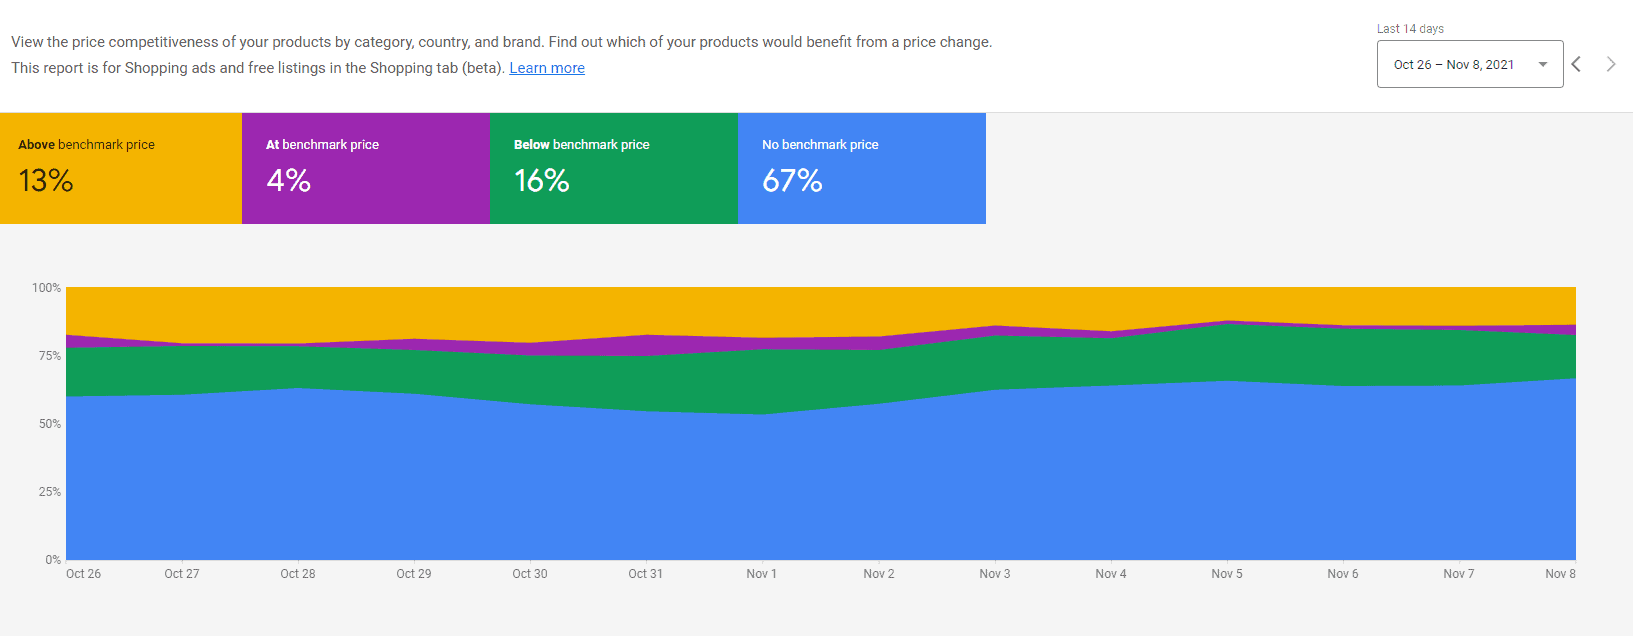 Price Competitiveness report from Google Merchant Center, showing a client's product price breakdown between "above benchmark price (13%), "at benchmark price (4%)," "below benchmark price (16%)," and "no benchmark price (67%)."